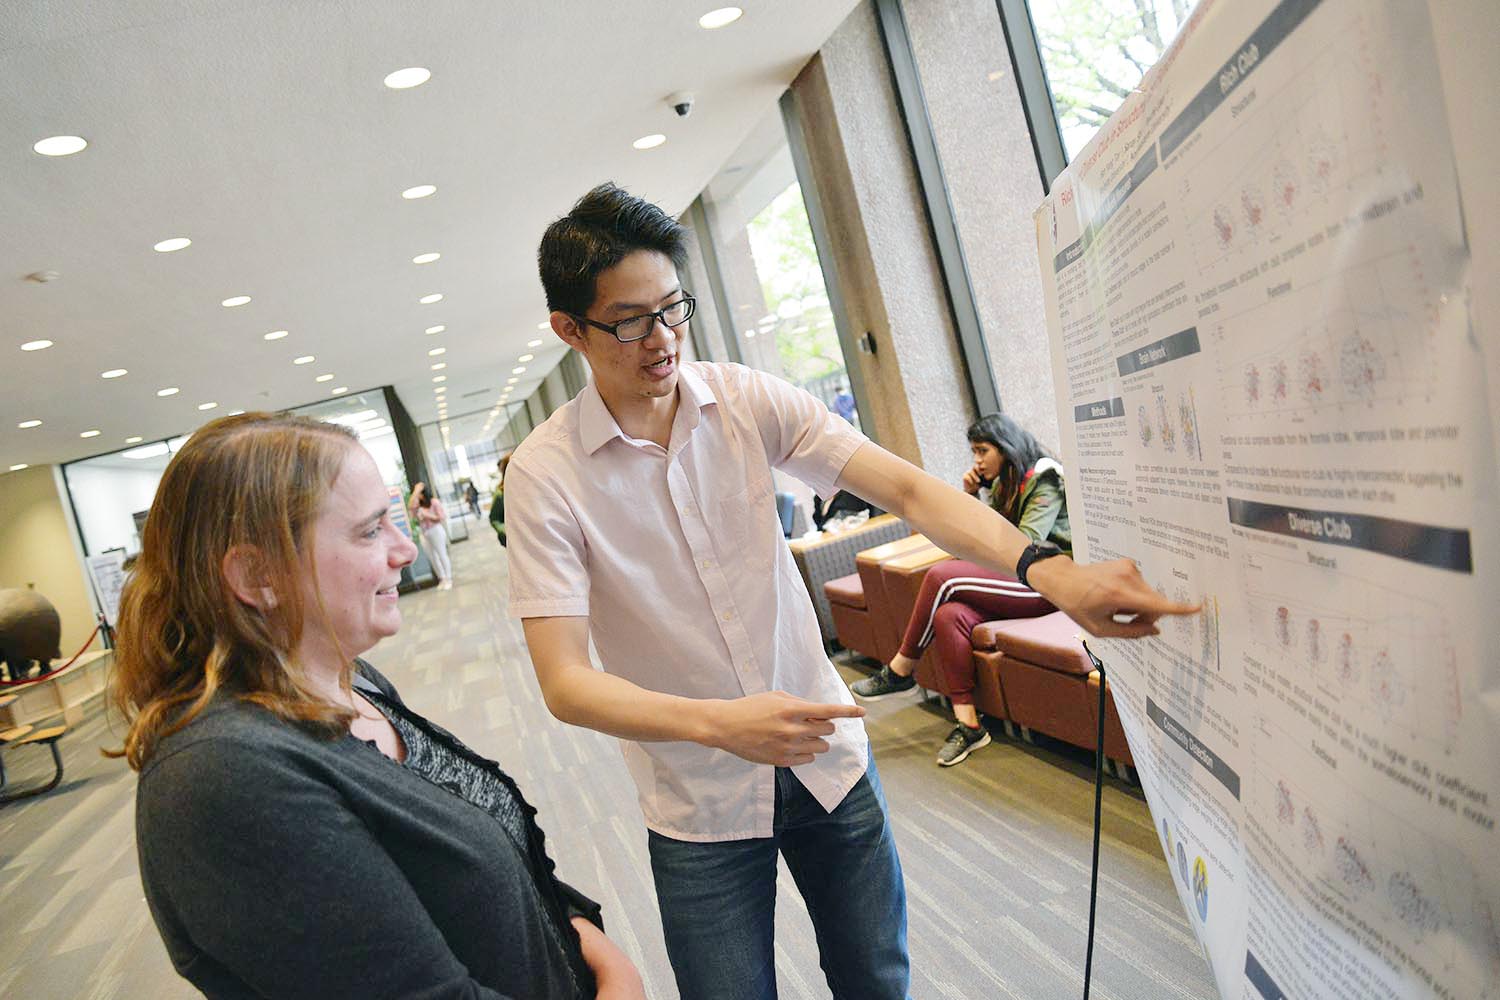 Han Yang Tay presented a poster titled "Rich Club and Diverse Club in Structural and Functional Neuroimaging Data." His advisor is Psyche Loui